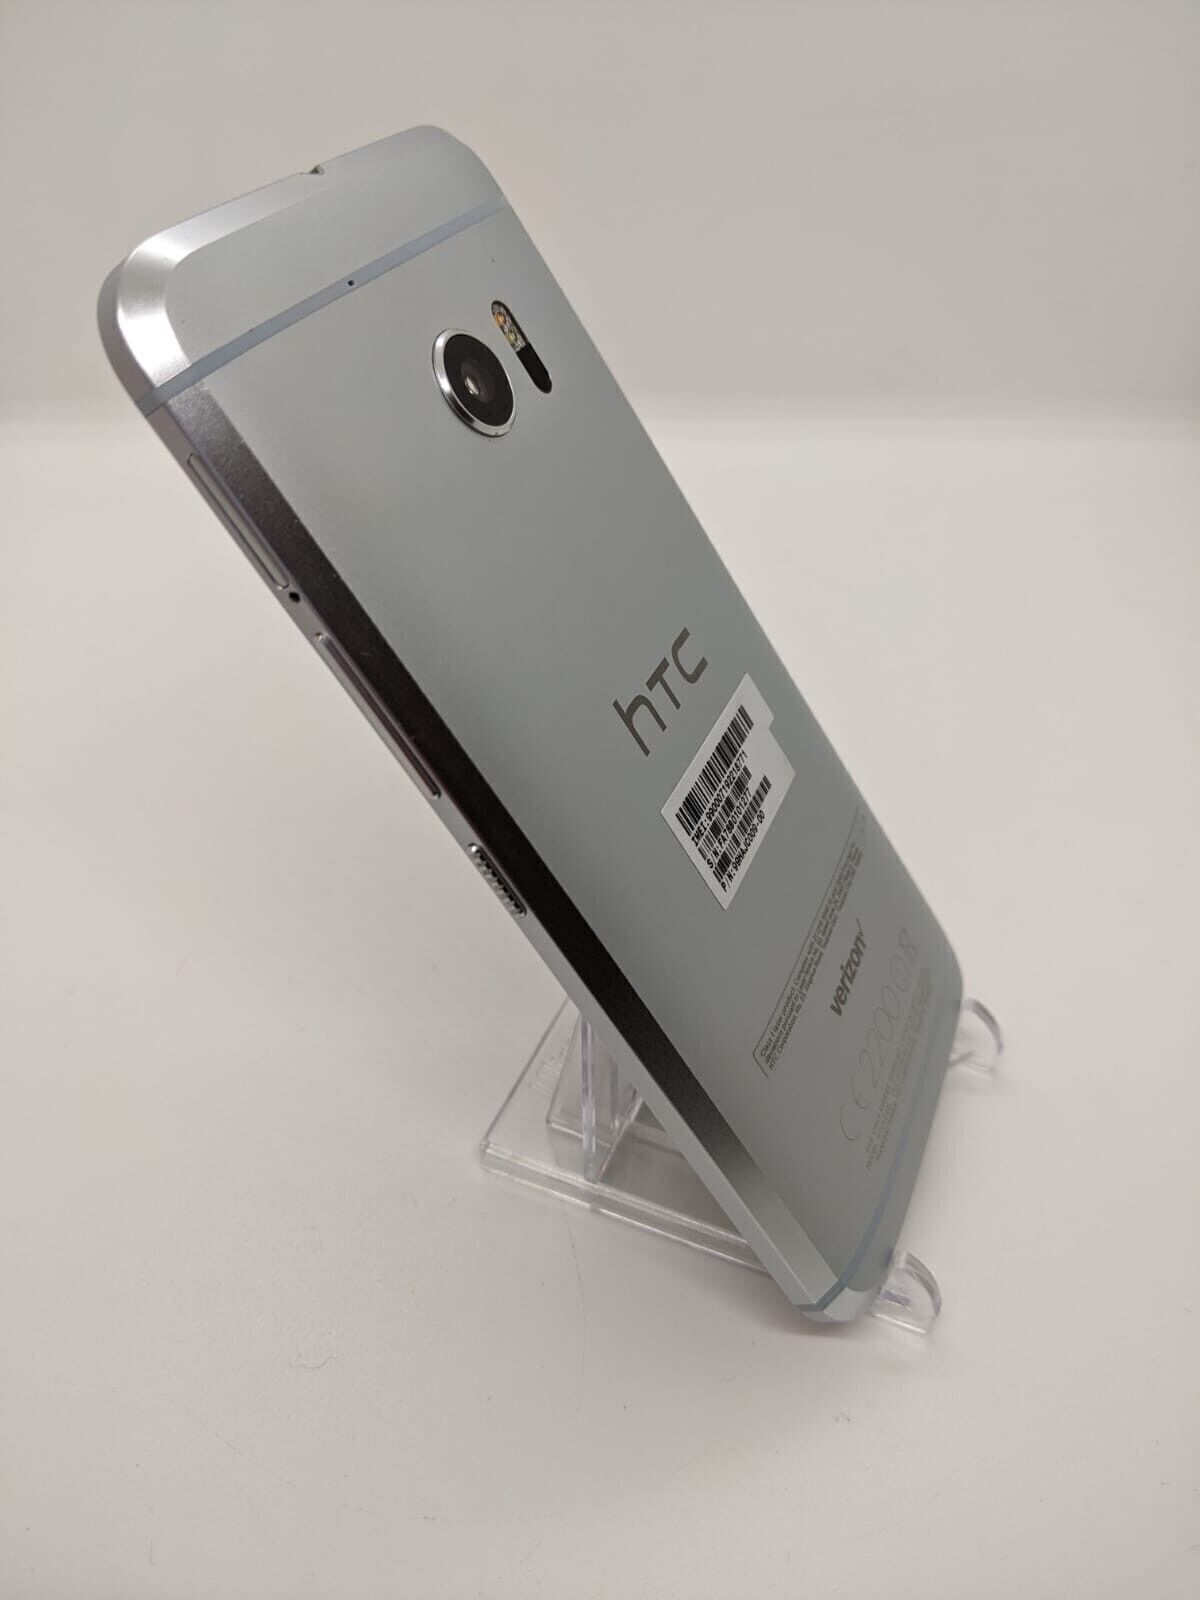 HTC 10 32GB Silver Verizon Android 4G LTE Smartphone HTC6545L FOR PARTS